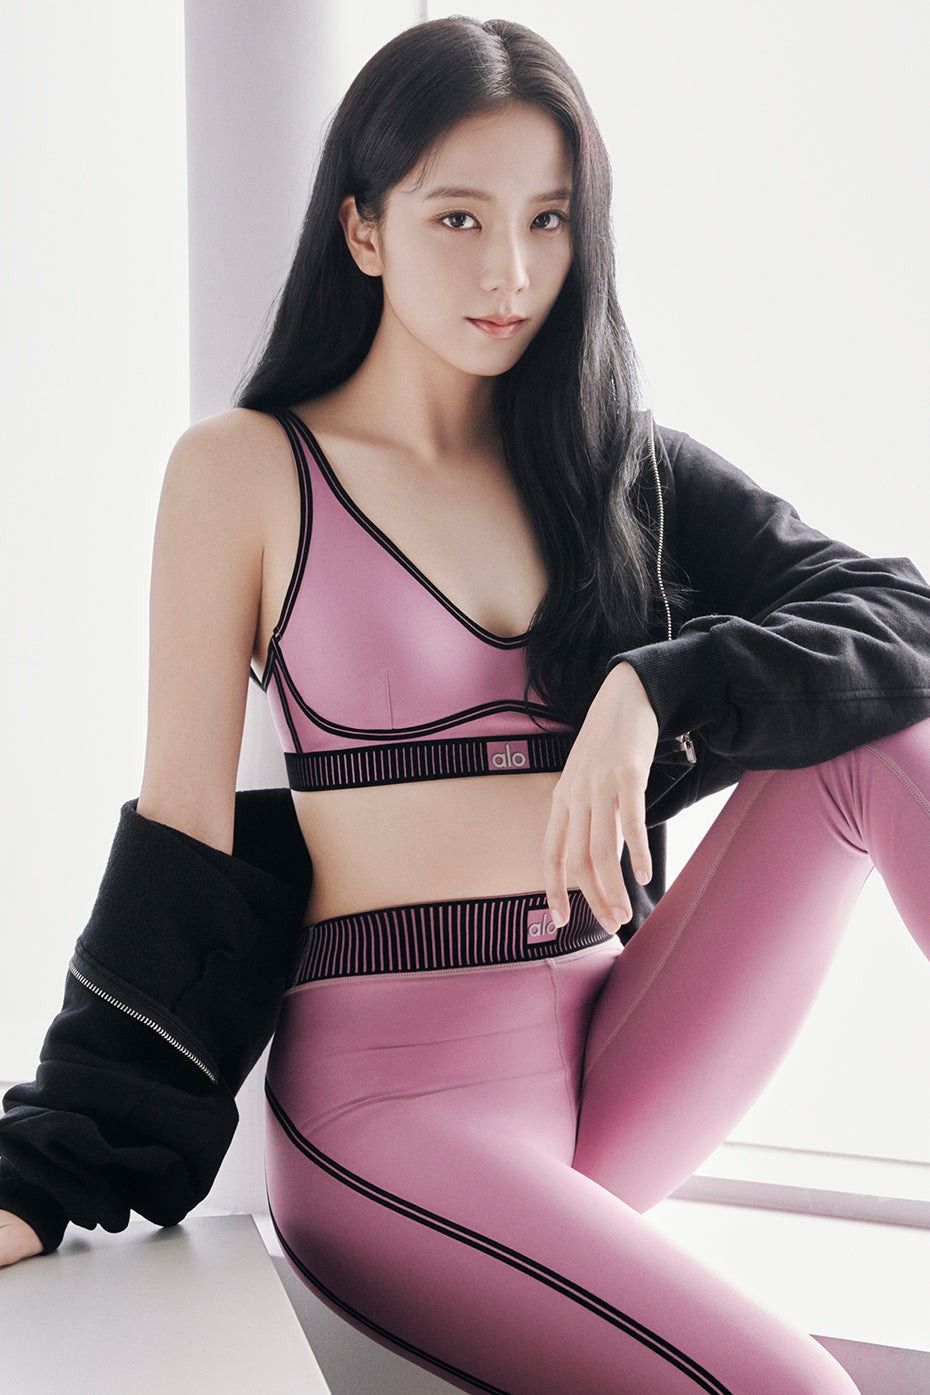 Blackpink's Jisoo's gym wear is on brand in new Alo Yoga campaign